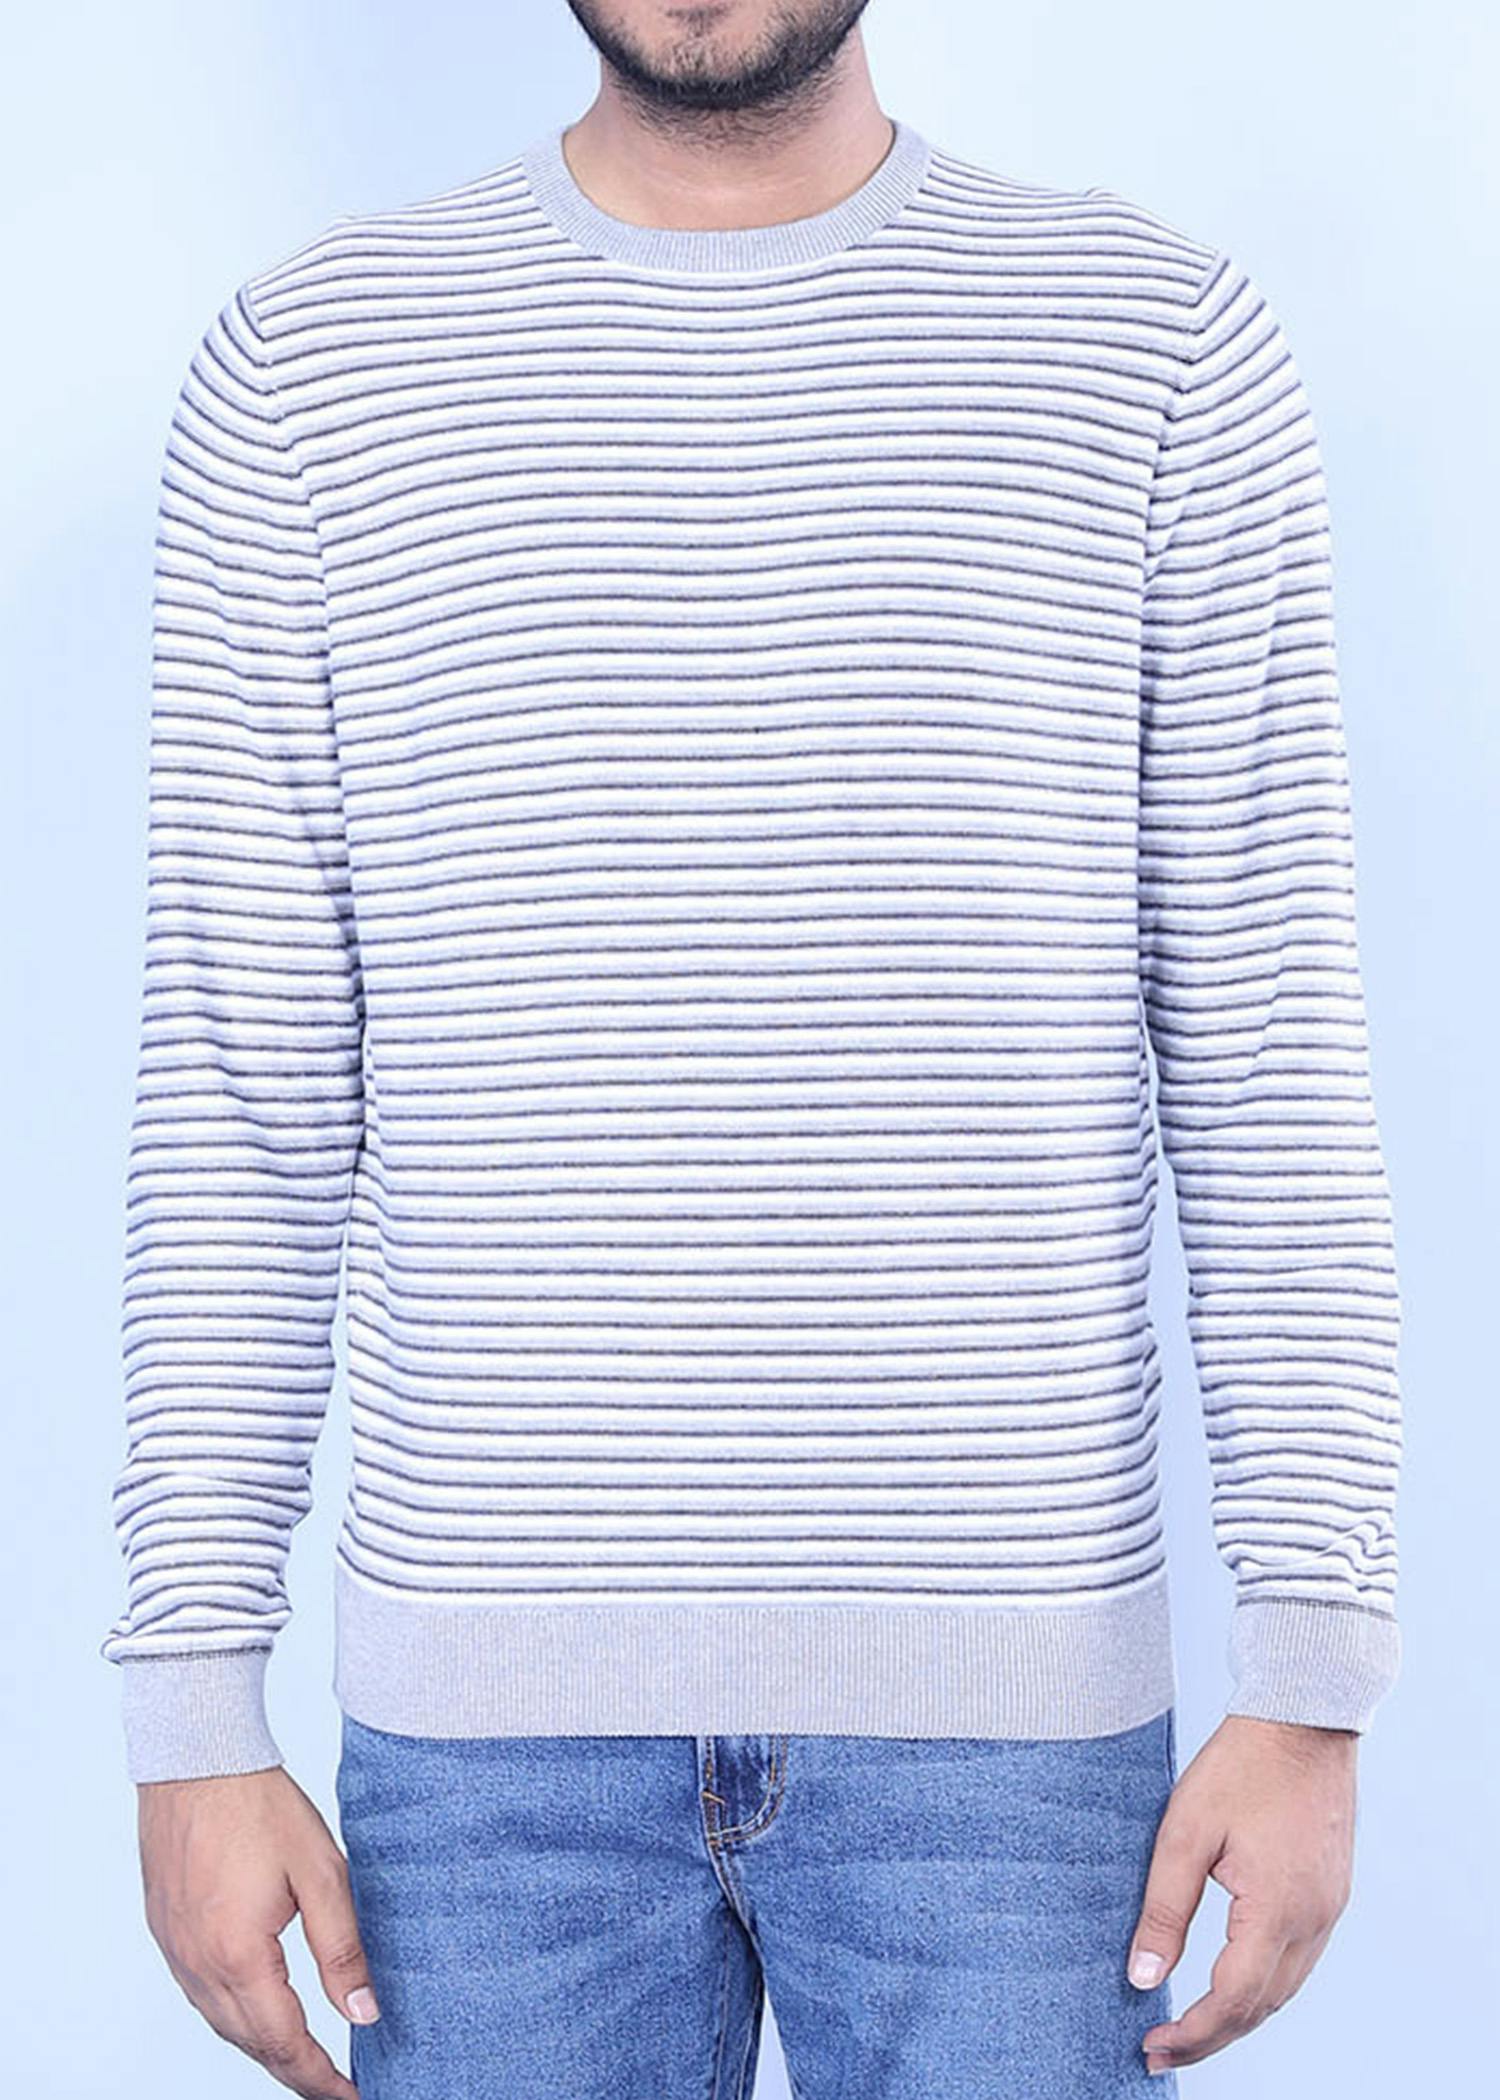 spotted dove sweater grigio color headcropped